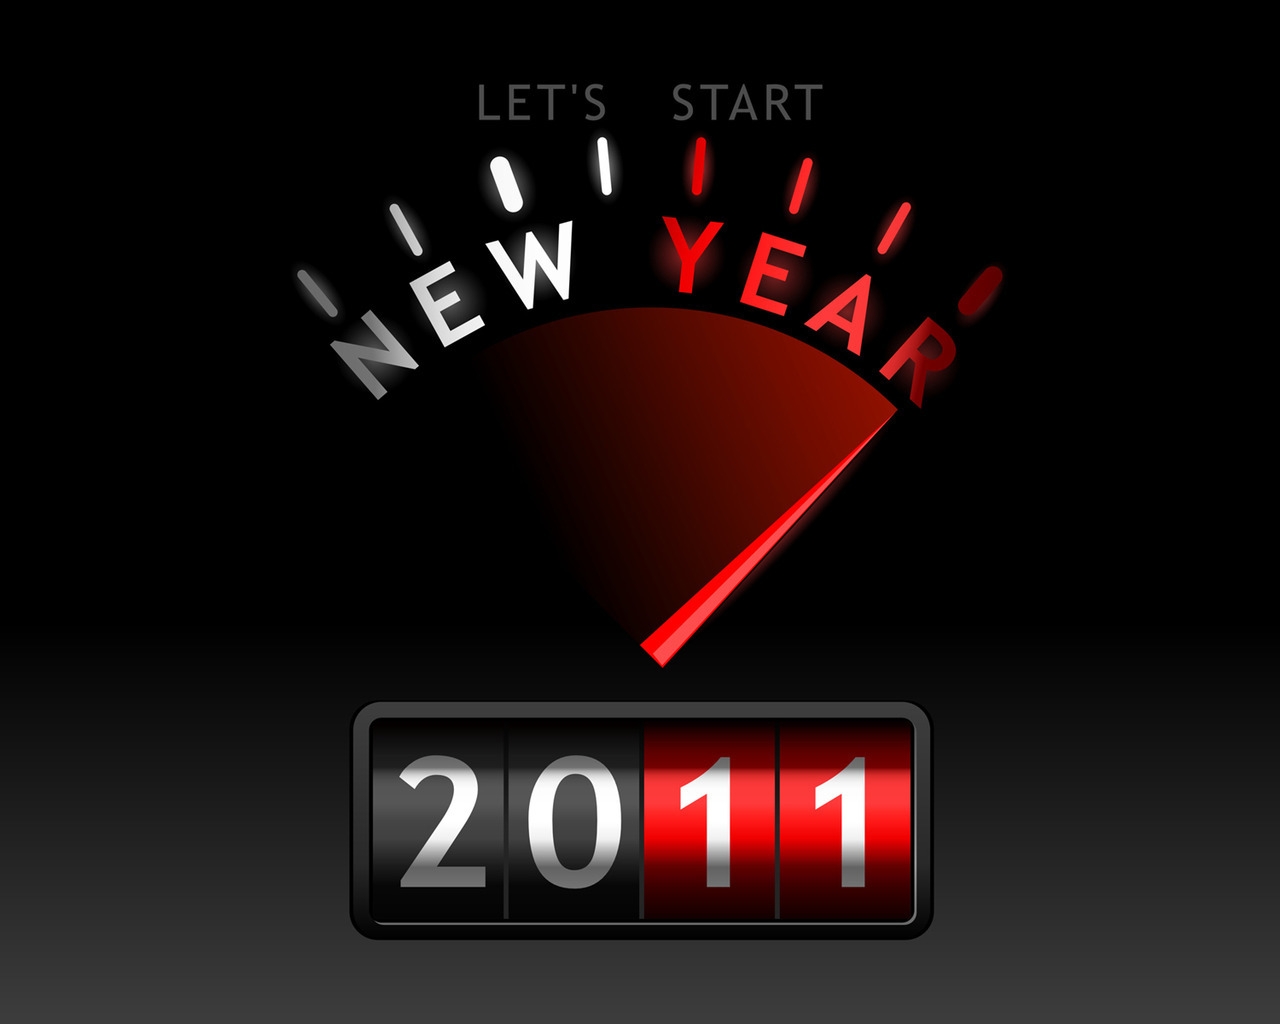 Ready for 2011 for 1280 x 1024 resolution